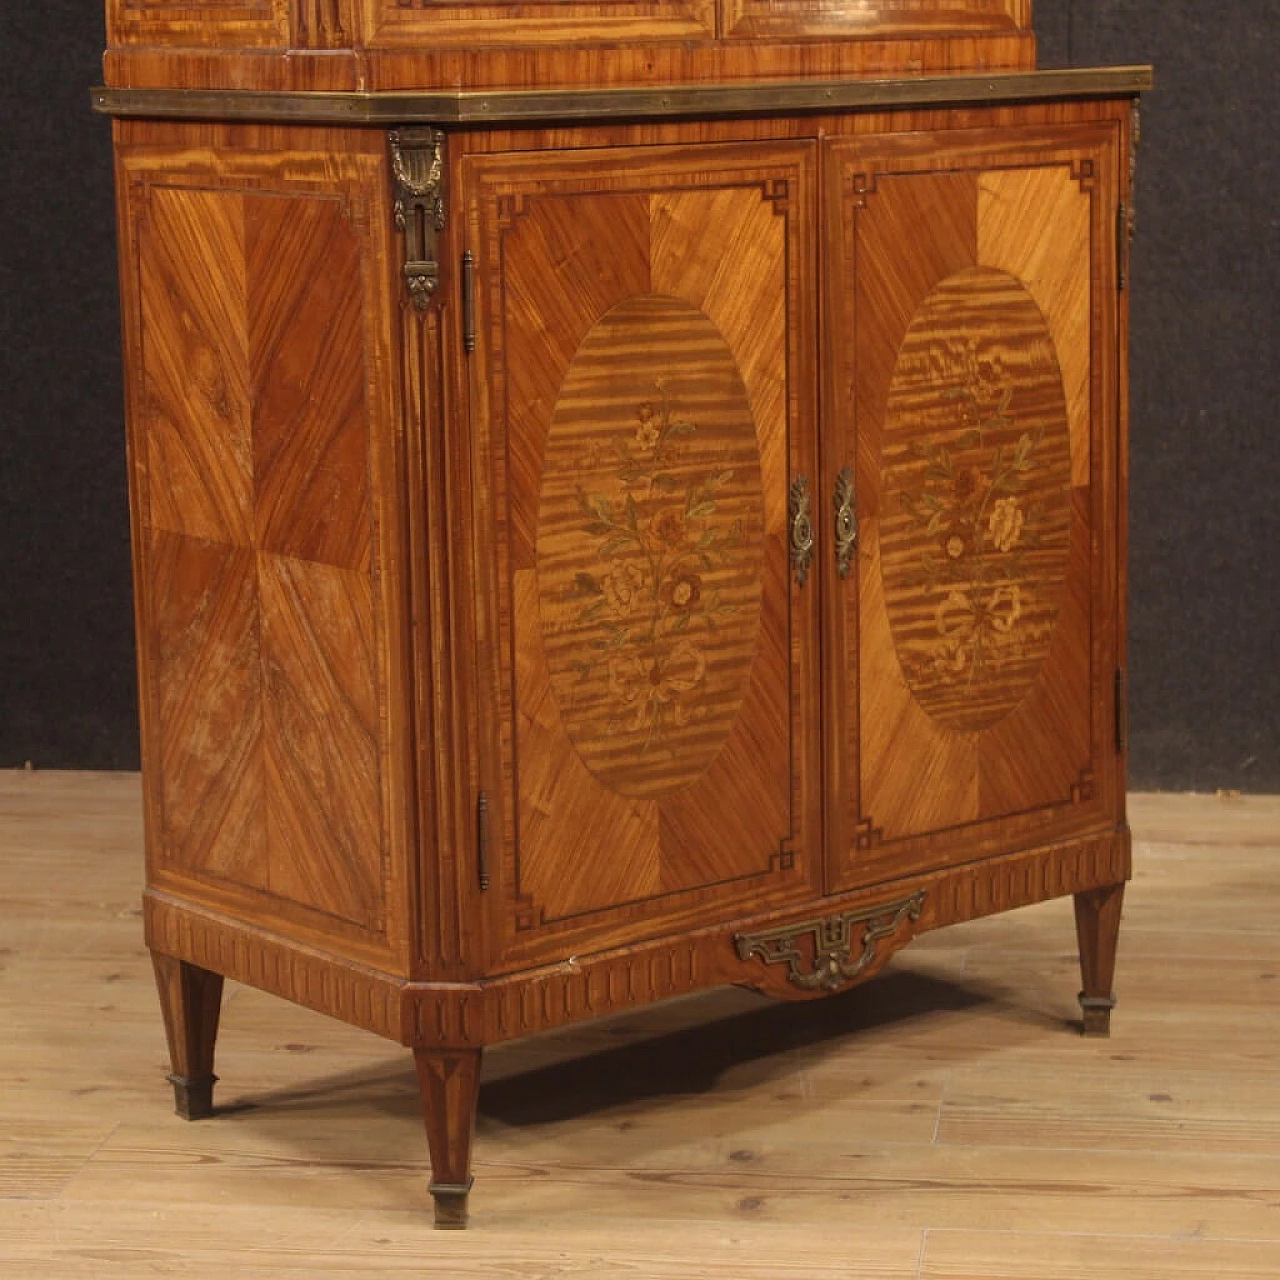 Inlaid wood double-bodied bookcase, early 20th century 1071250